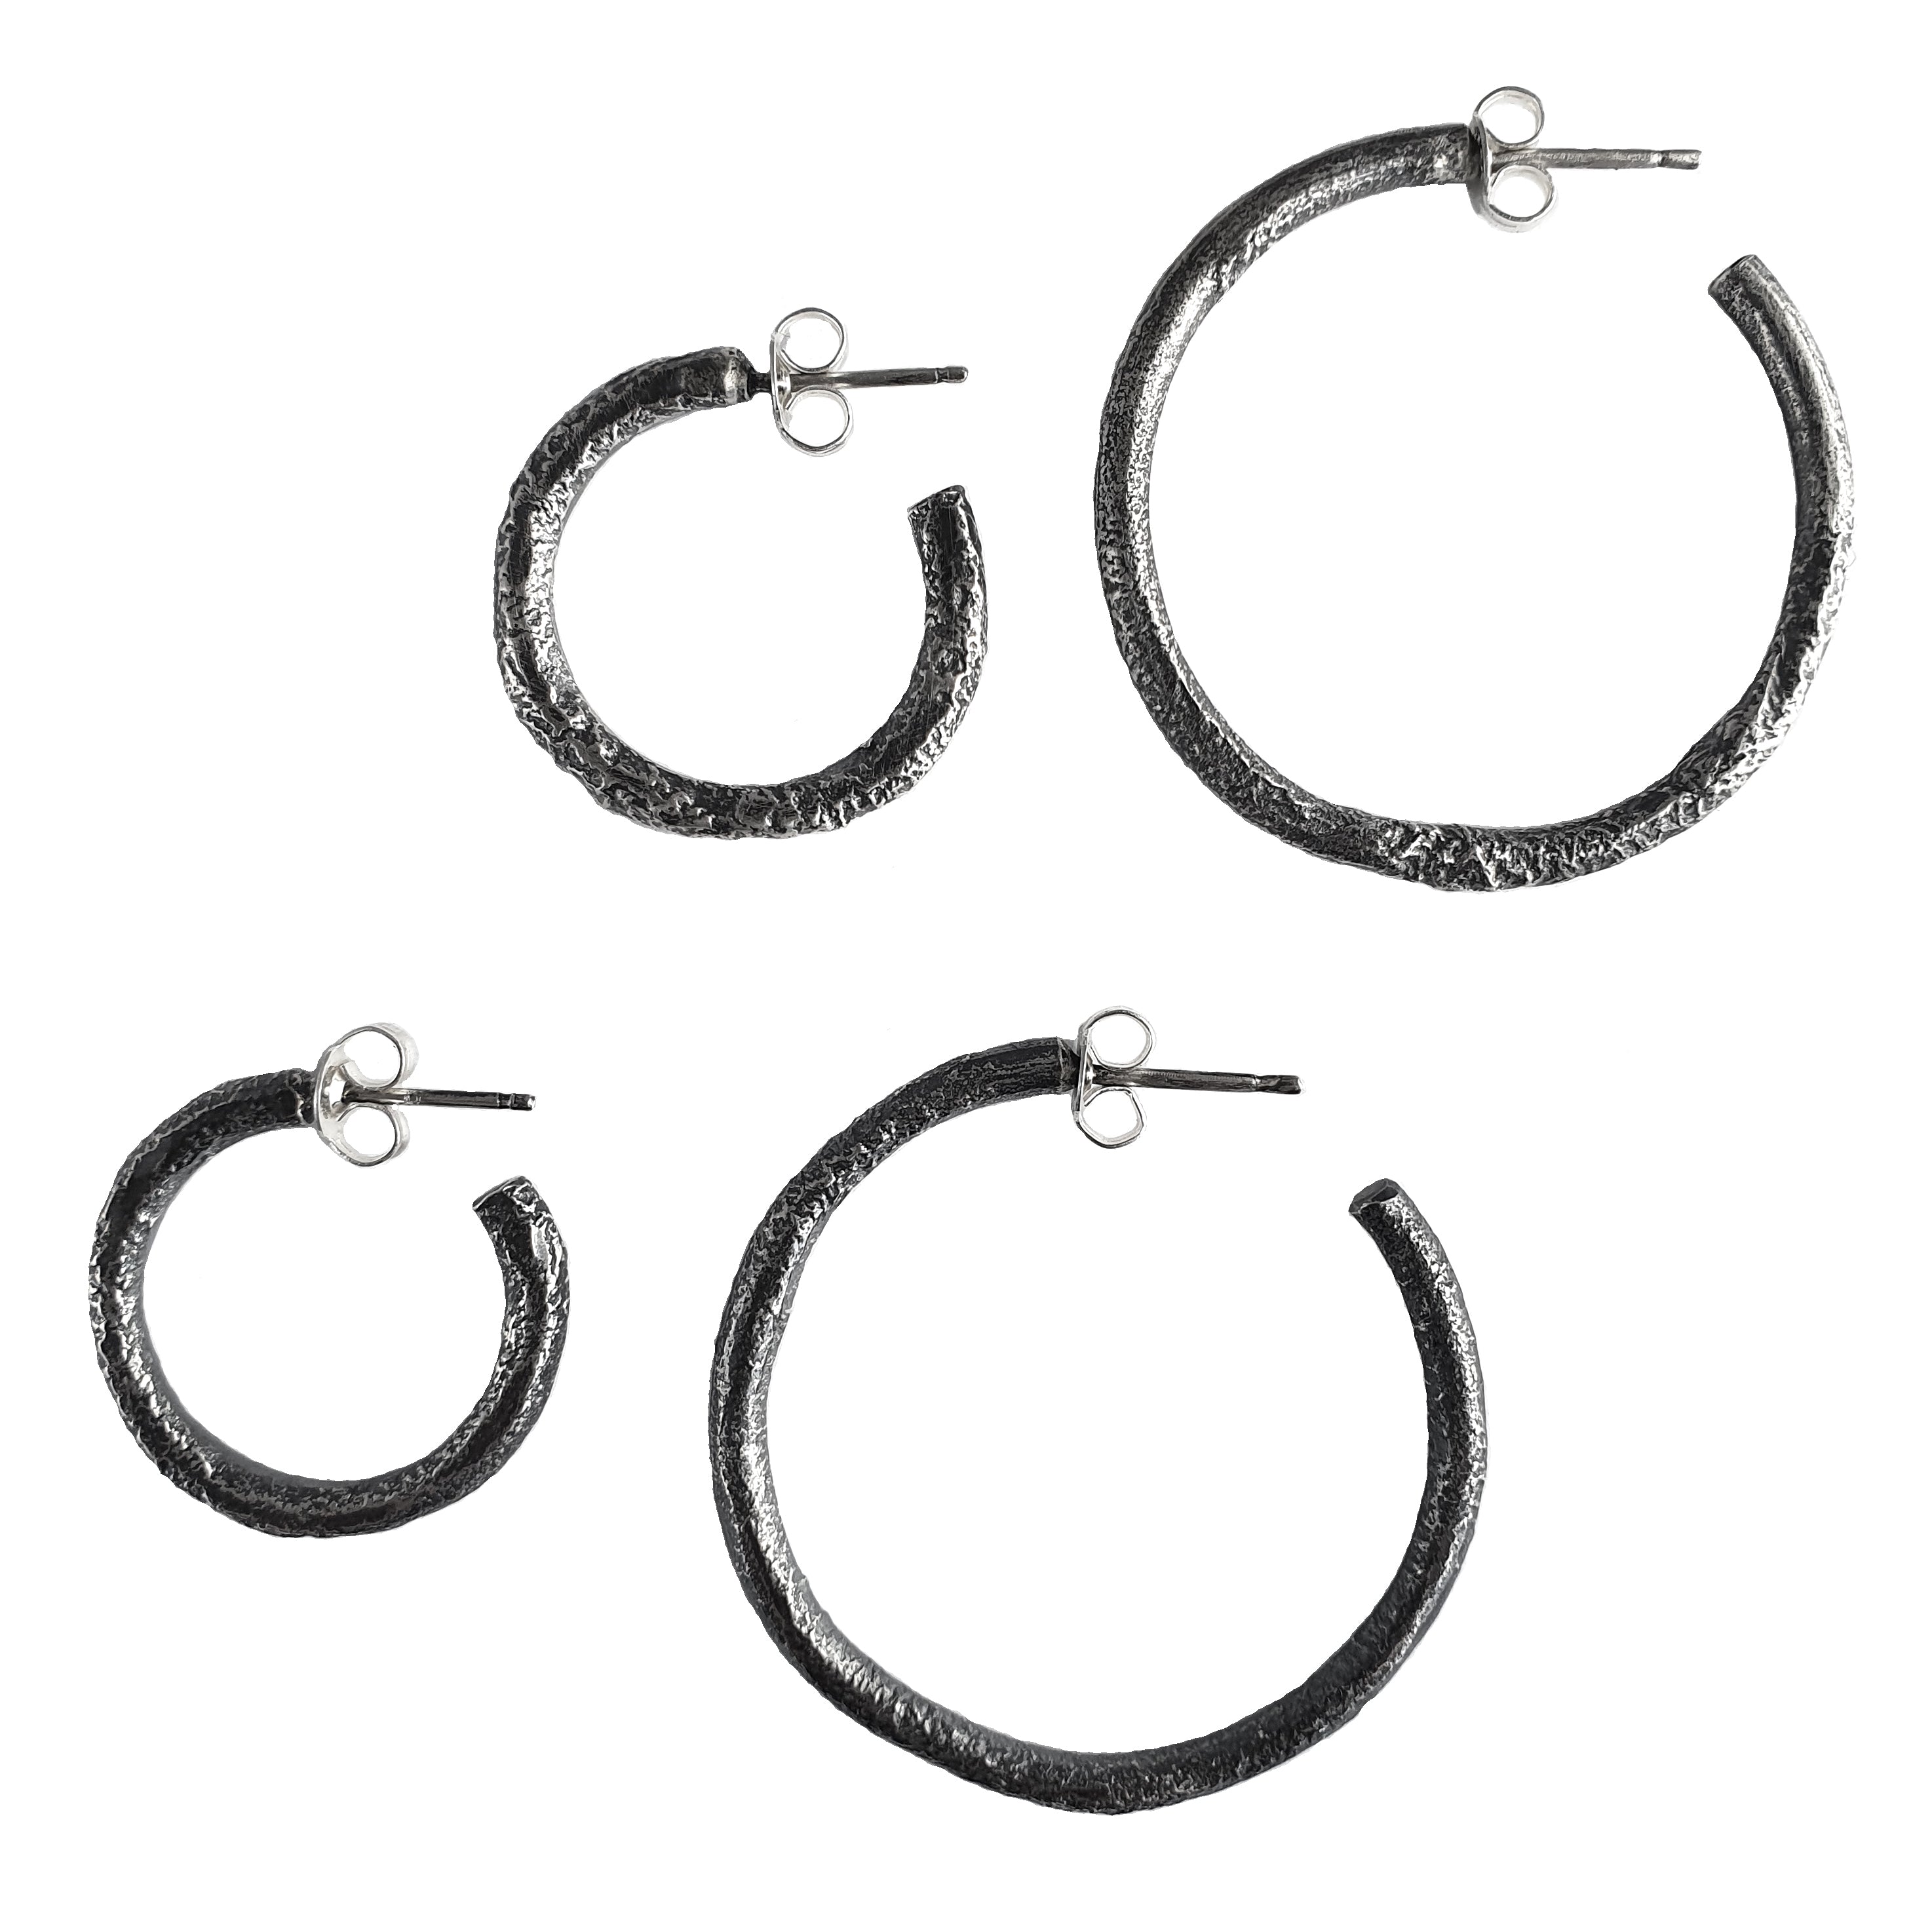 Reticulated Hoops